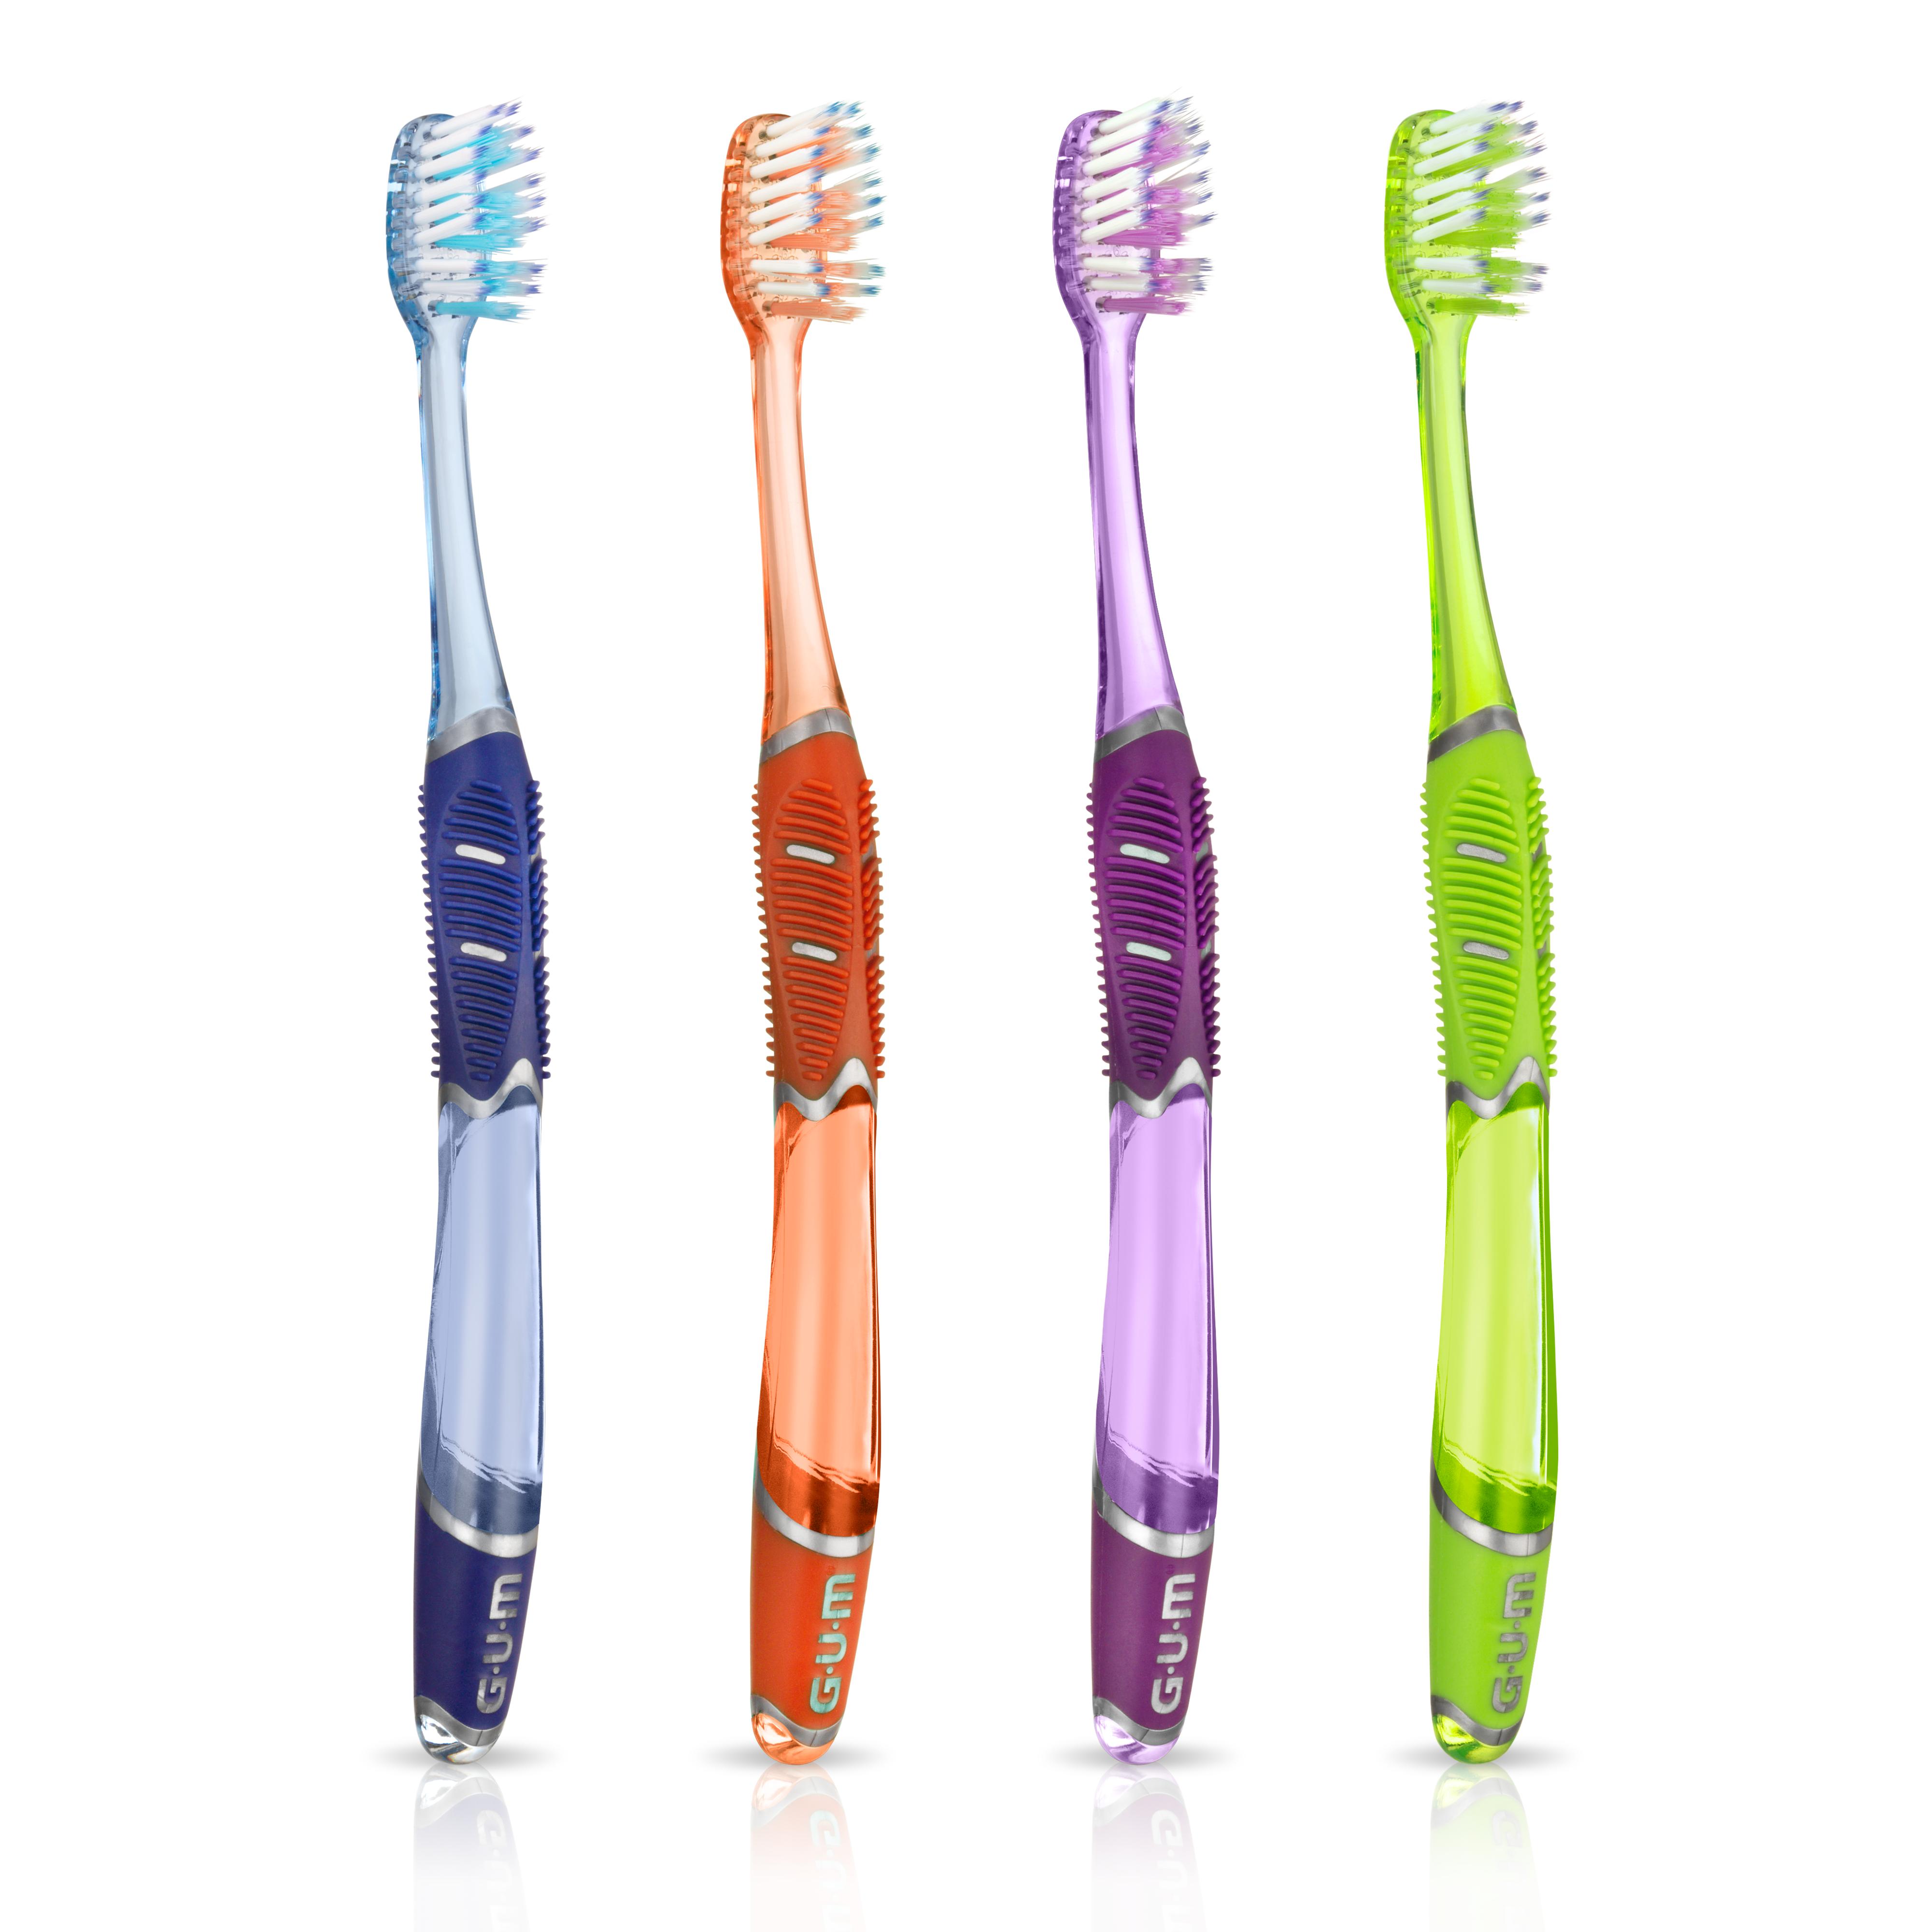 525-Product-Toothbrush-Manual-Technique-DeepClean-naked-4colors.png